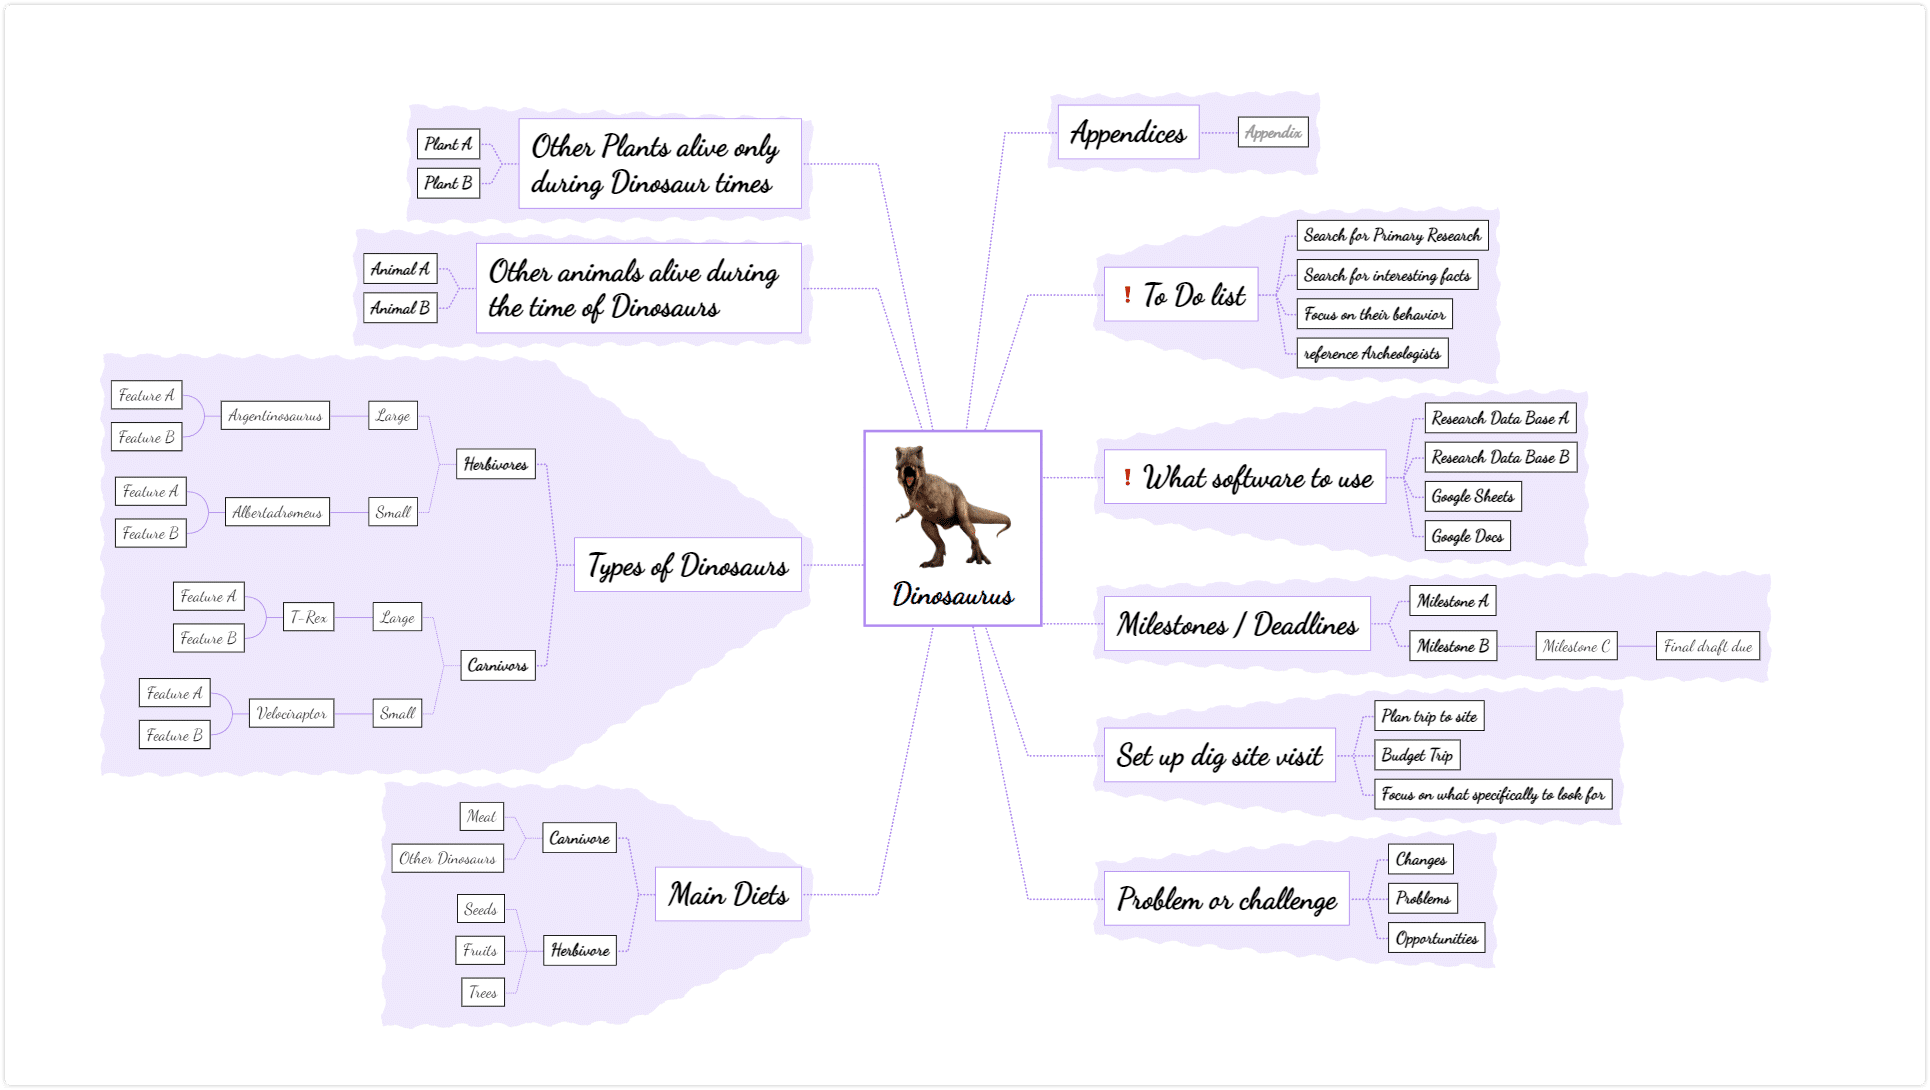 Mind map example of visual diagram